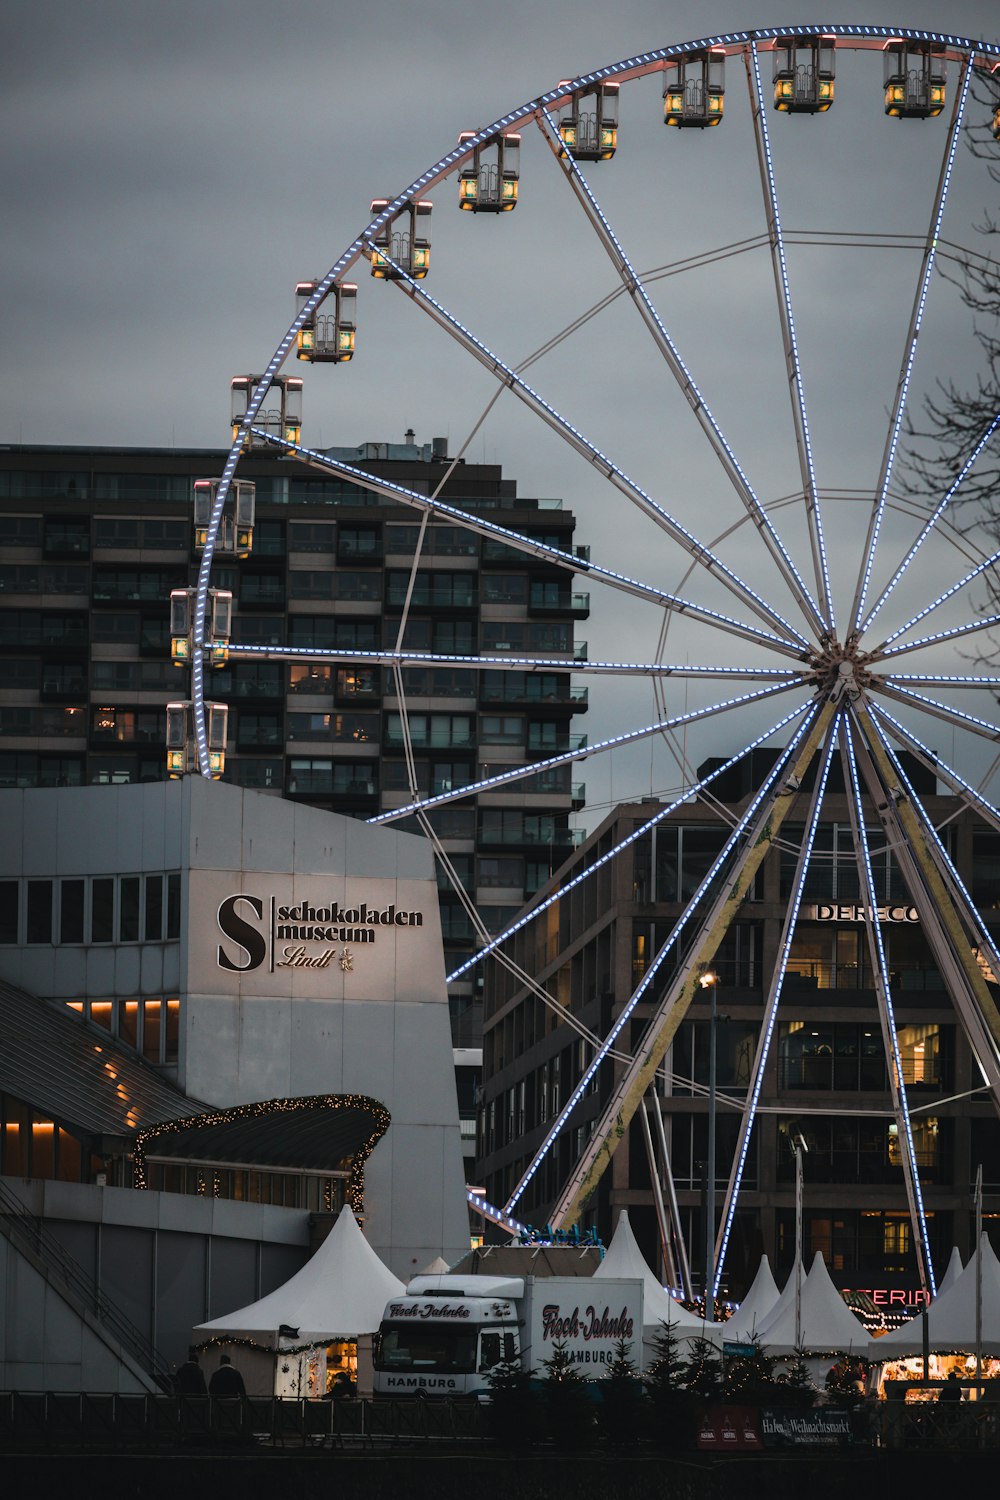 a large ferris wheel sitting in front of a tall building